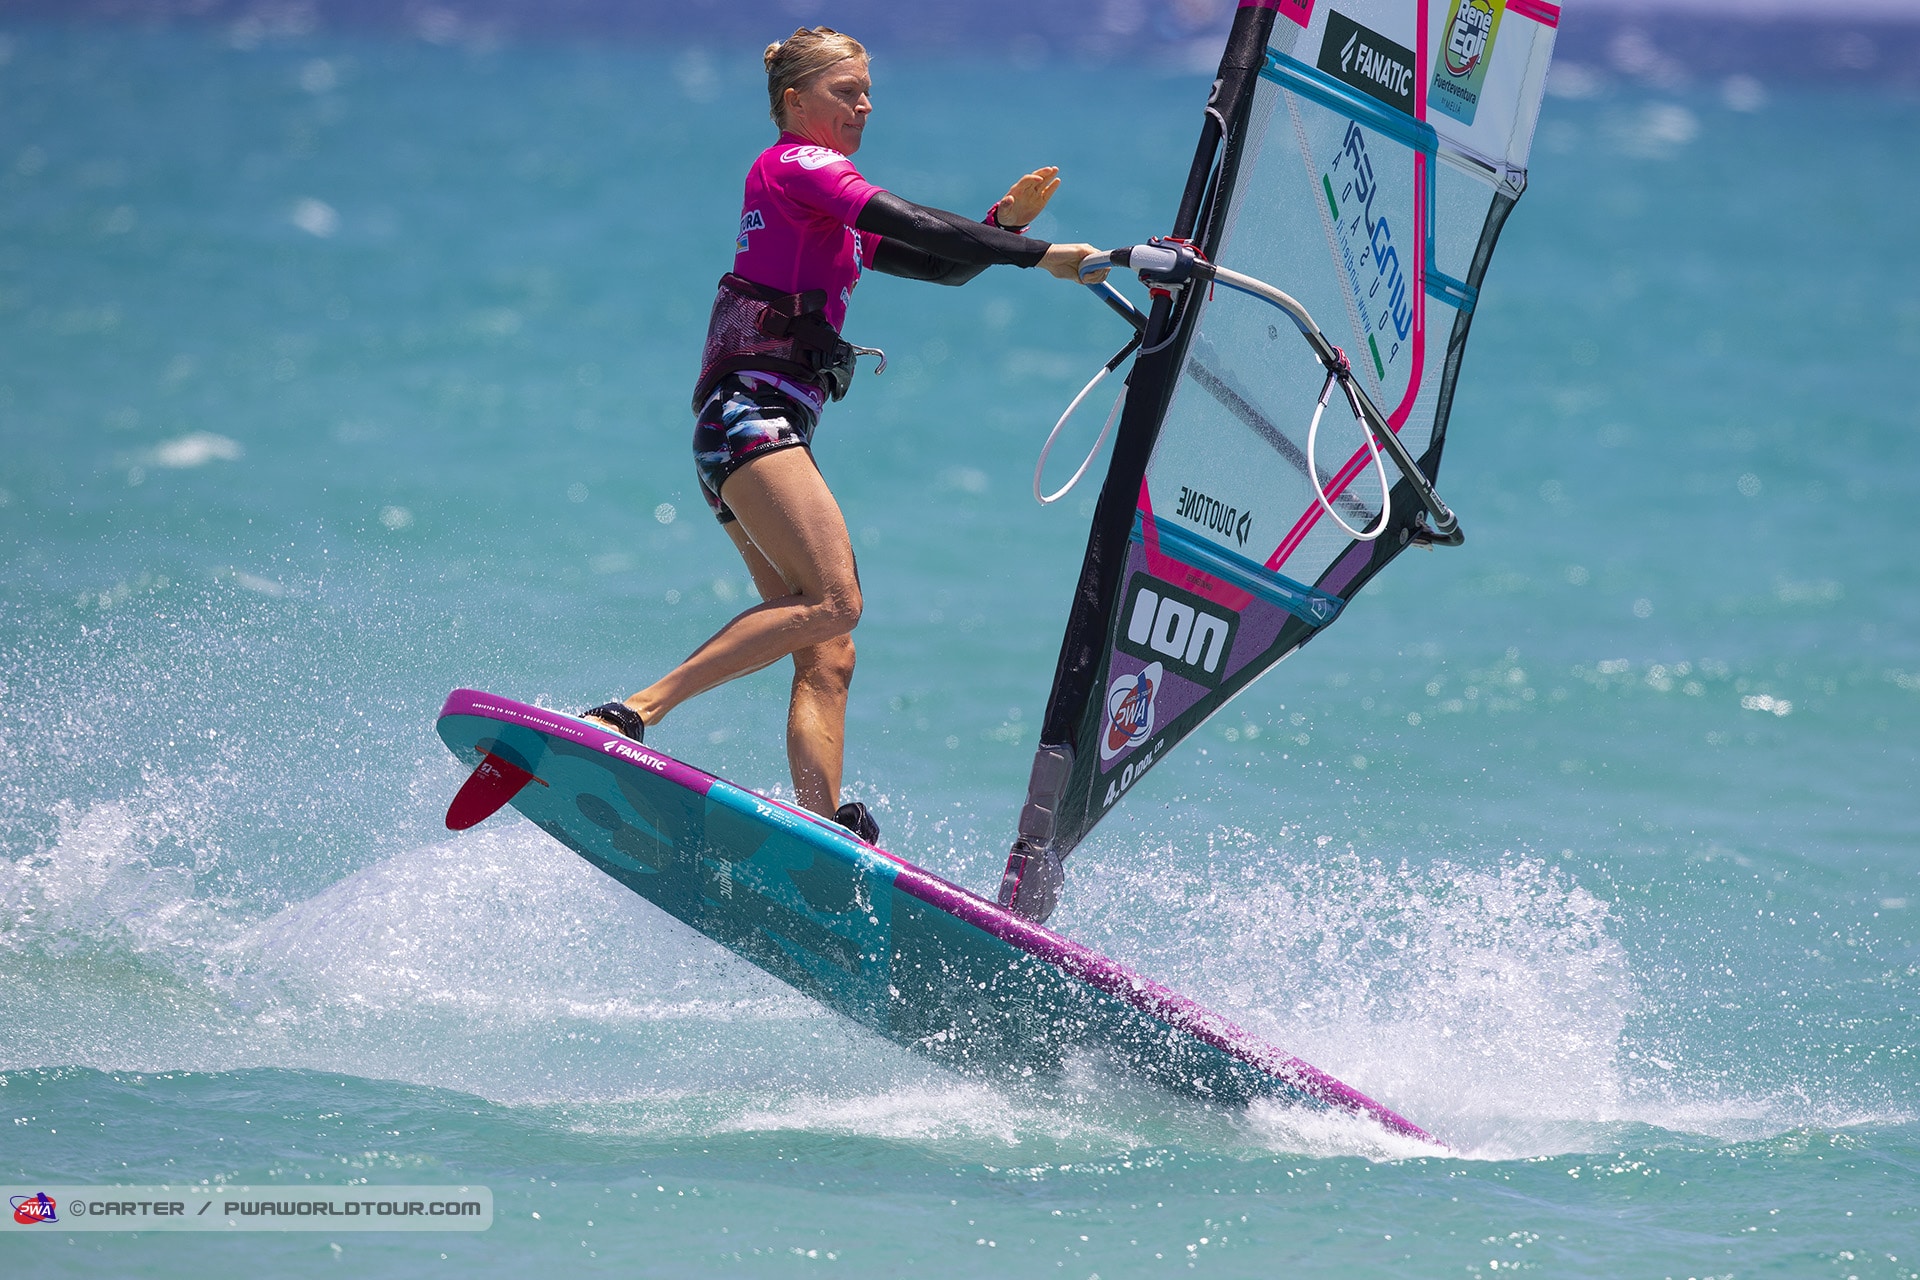 Arrianne Aukes is happy that future windsurfing girls will feel equal to men (Photo: Carter/PWA)